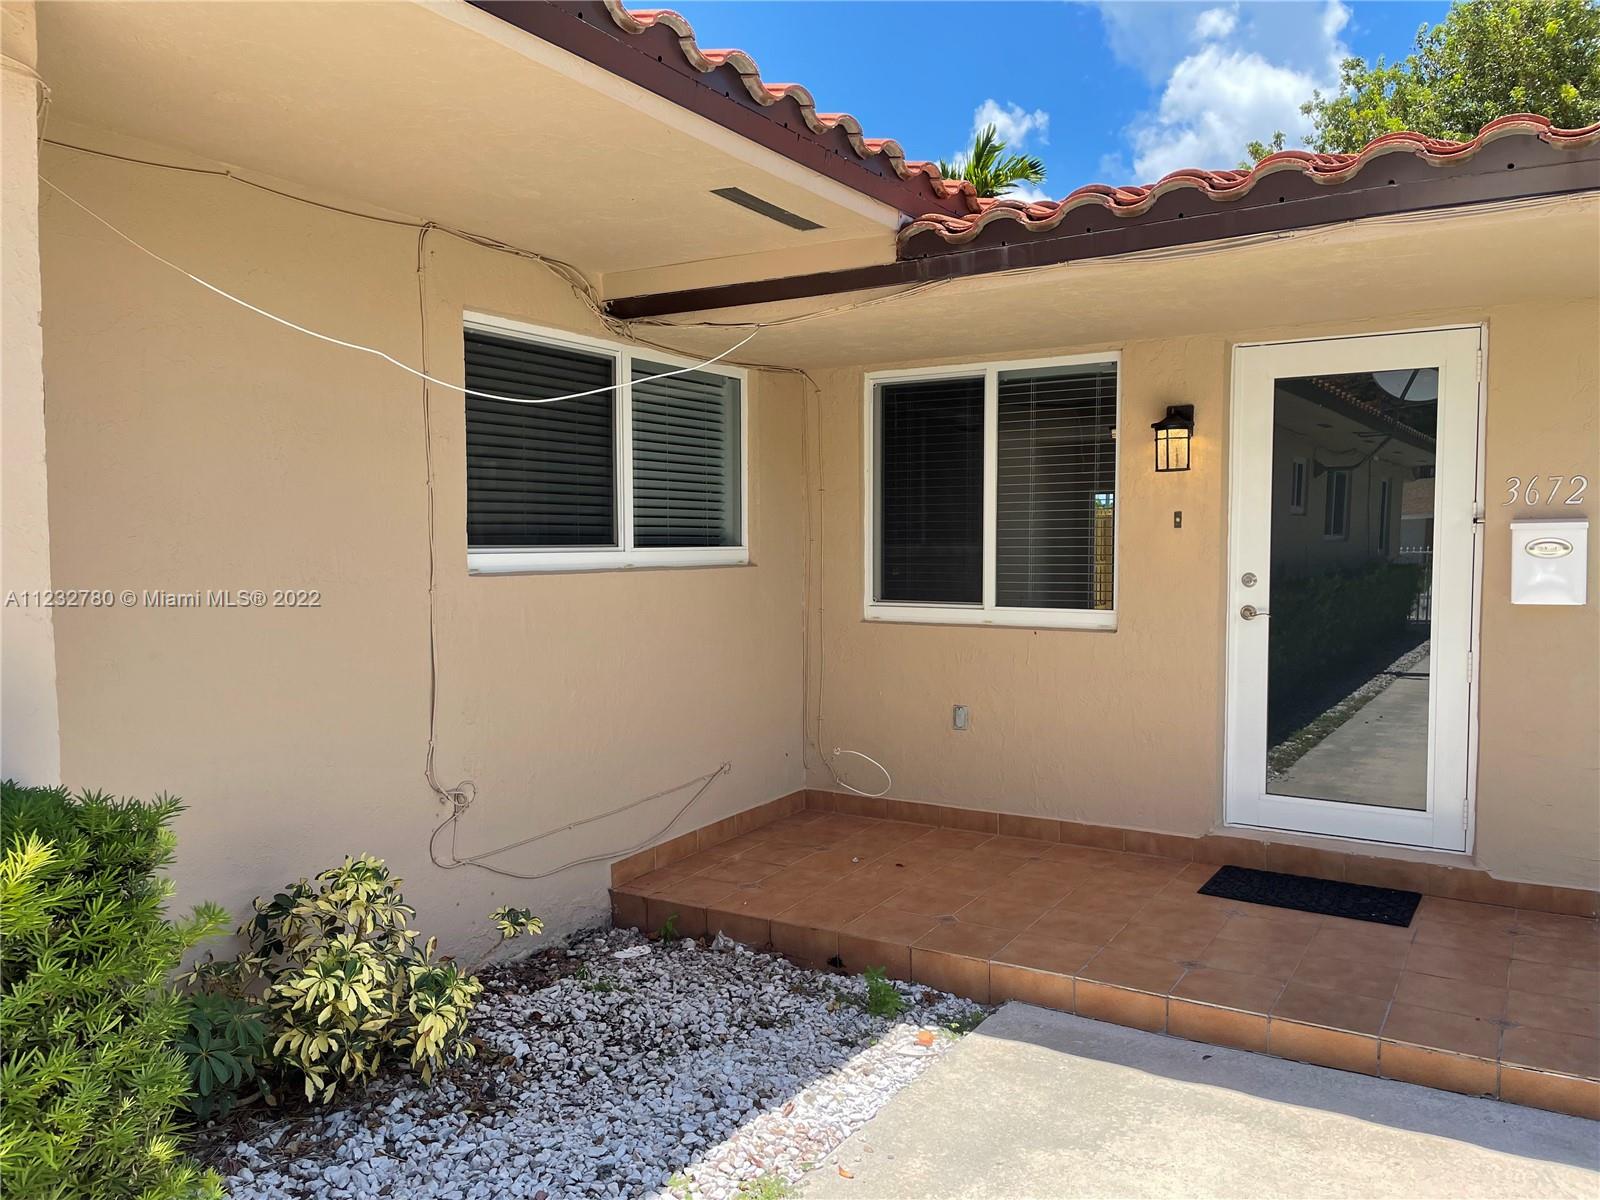 Updated, one level twin home, conveniently located between Coconut Grove and Coral Gables. Low traffic, No Outlet street! Tile floors through out. Newer roof in the past 5 years. Newer impact doors and windows. Open floor plan. Functional kitchen with wood cabinets and granite countertops. Newer appliances. Separate laundry room with lots of storage. Large master suite with walk in closet. Two more nice size rooms share the second full bathroom. Deep driveway can accommodate multiple cars. Large fenced in back yard. No neighbors in the back!!! Direct access to The Douglas Park from backyard which has basketball & tennis courts, children's playground, walking, running and biking path, lots of green space. No maintenance fee. Each owner pay for their own insurance and expenses.